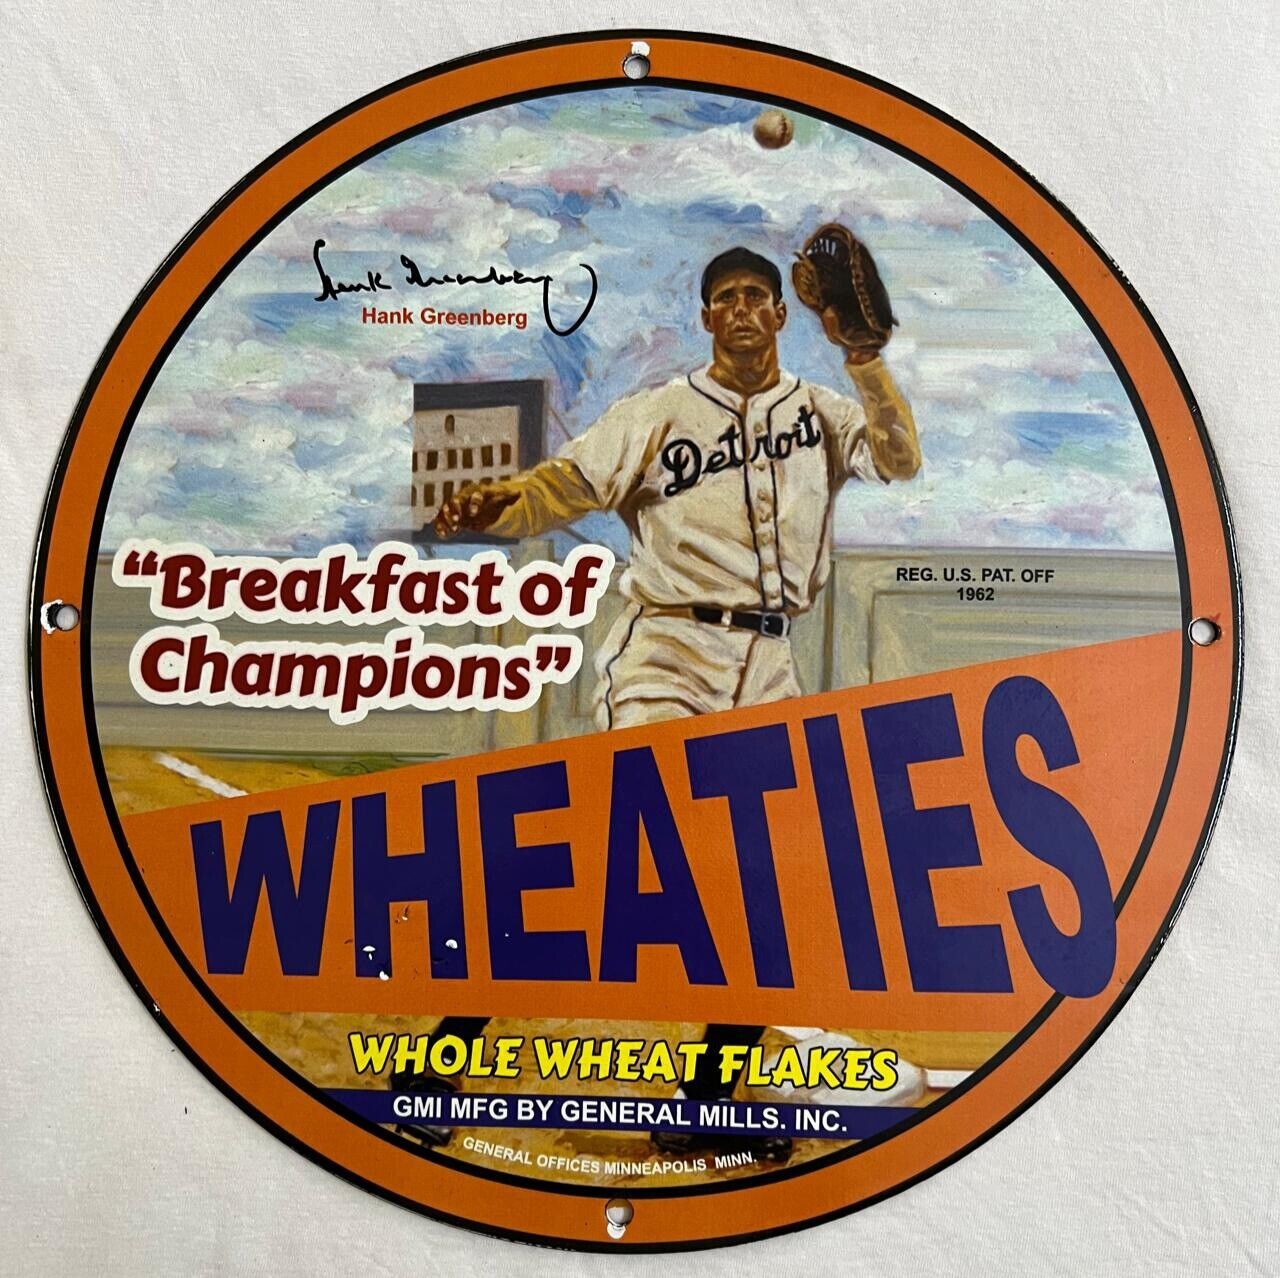 WHEATIES BREAKFAST OF CHAMPIONS HANK GREENBERG PORCELAIN STATION GAS OIL AD SIGN